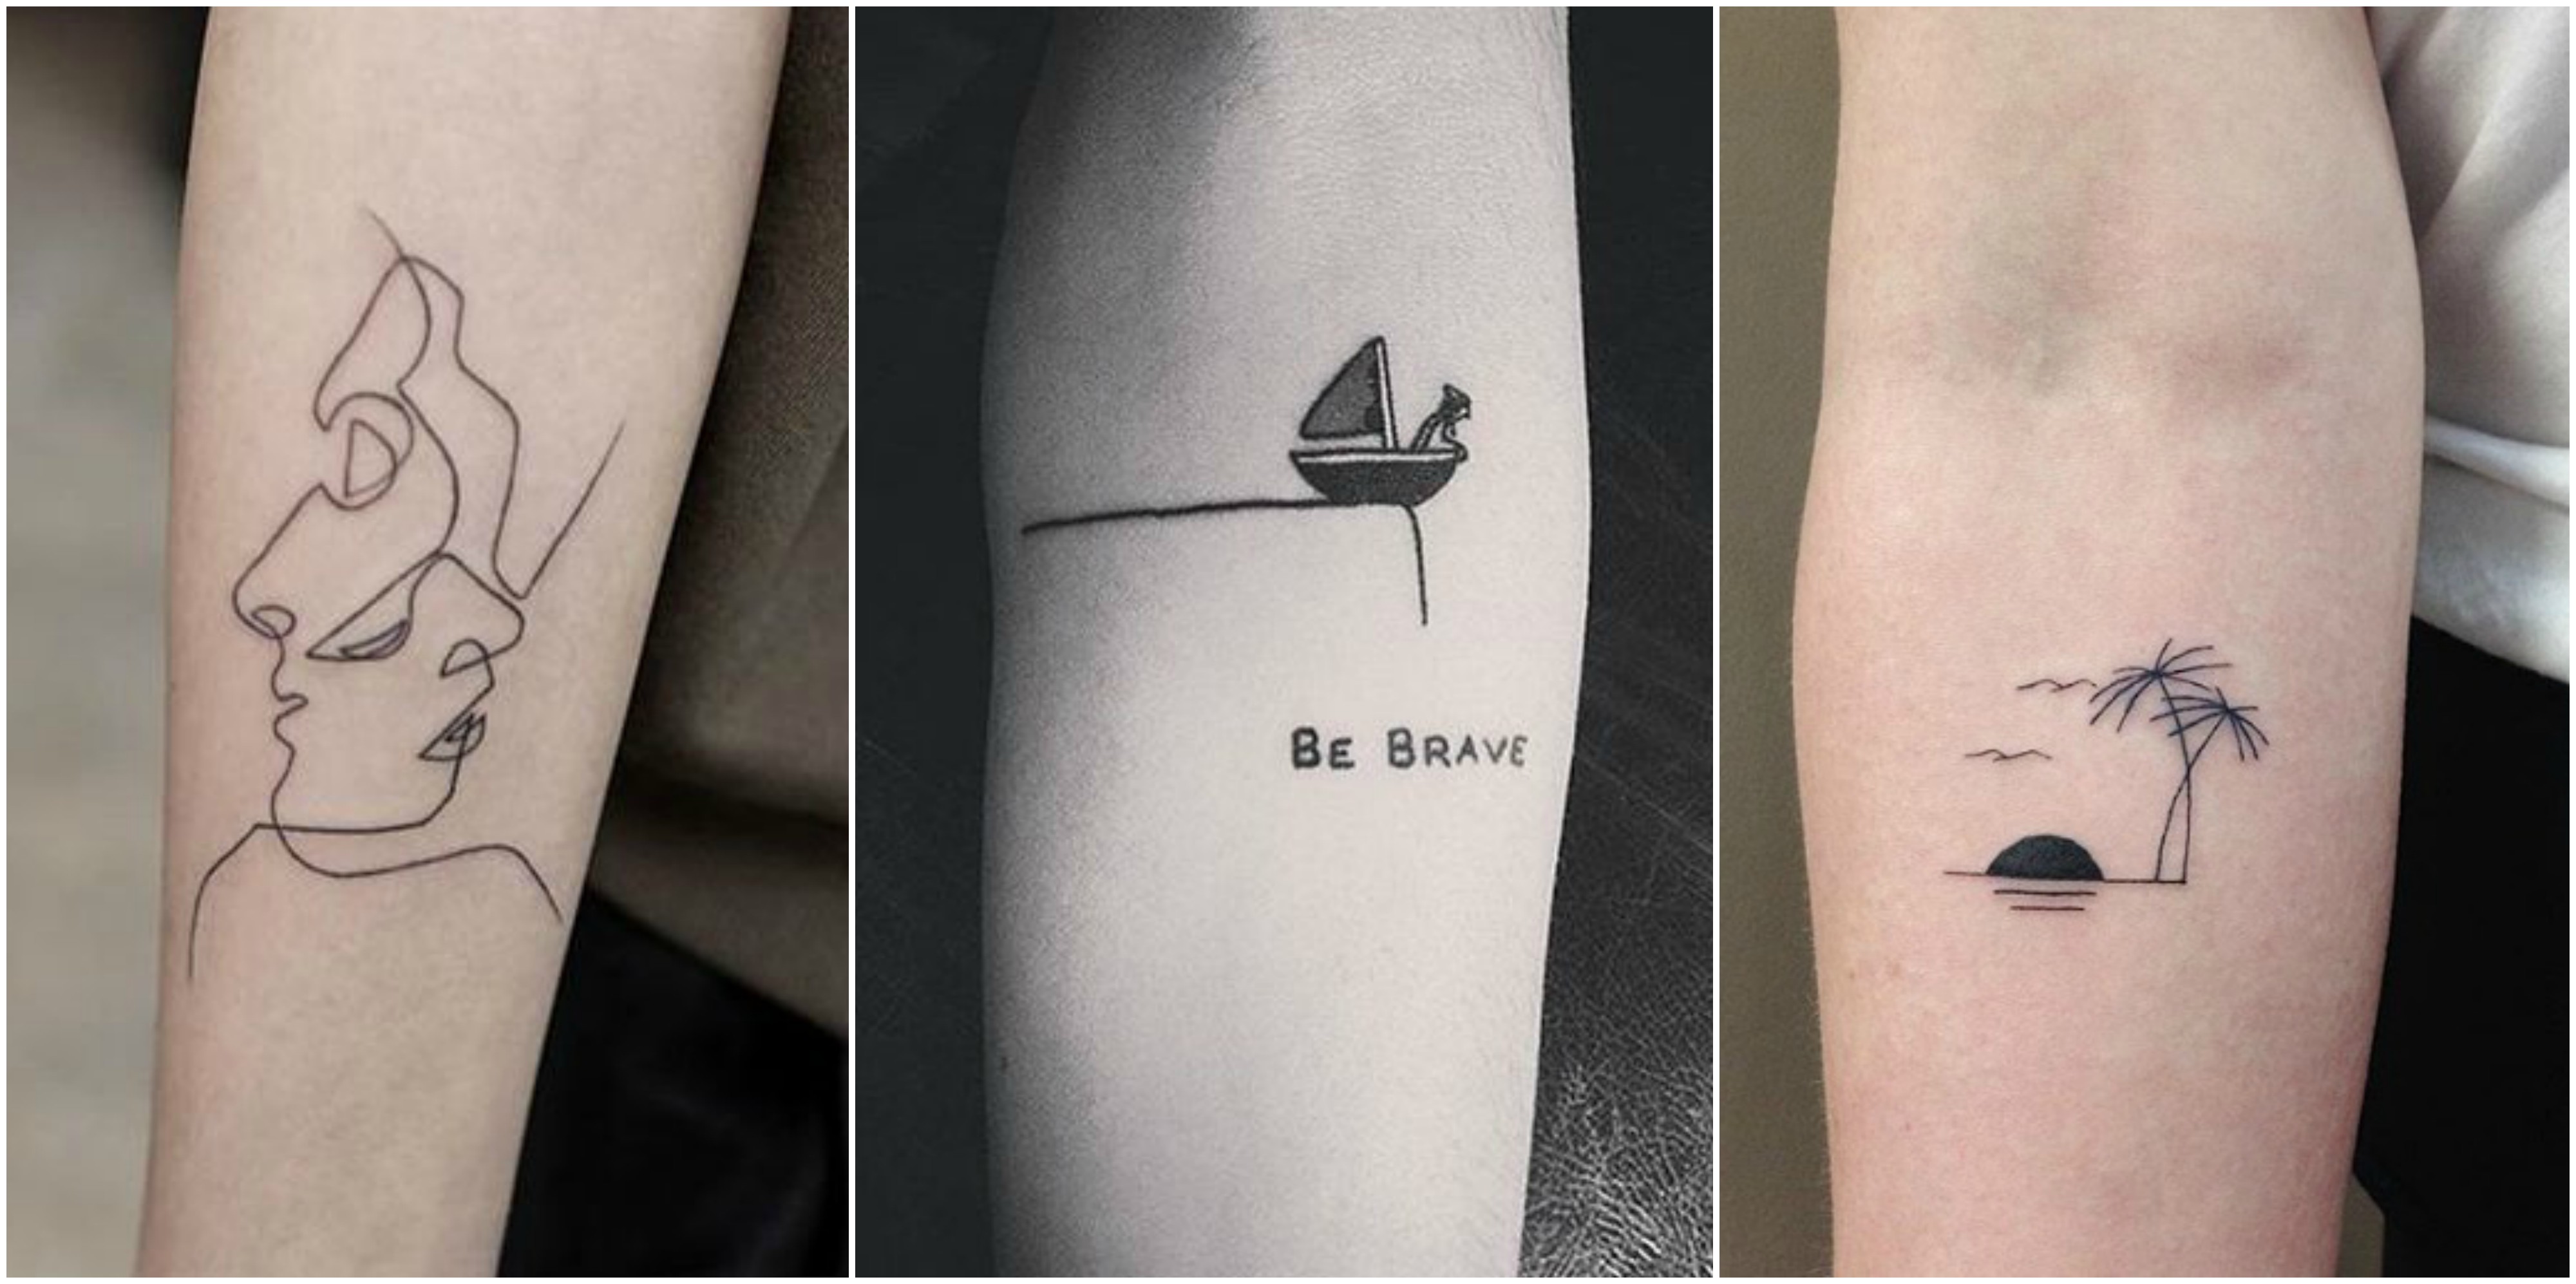 22 Unique Tattoo Ideas That Are Not Flowers, Arrows, Or Geometrical Figures